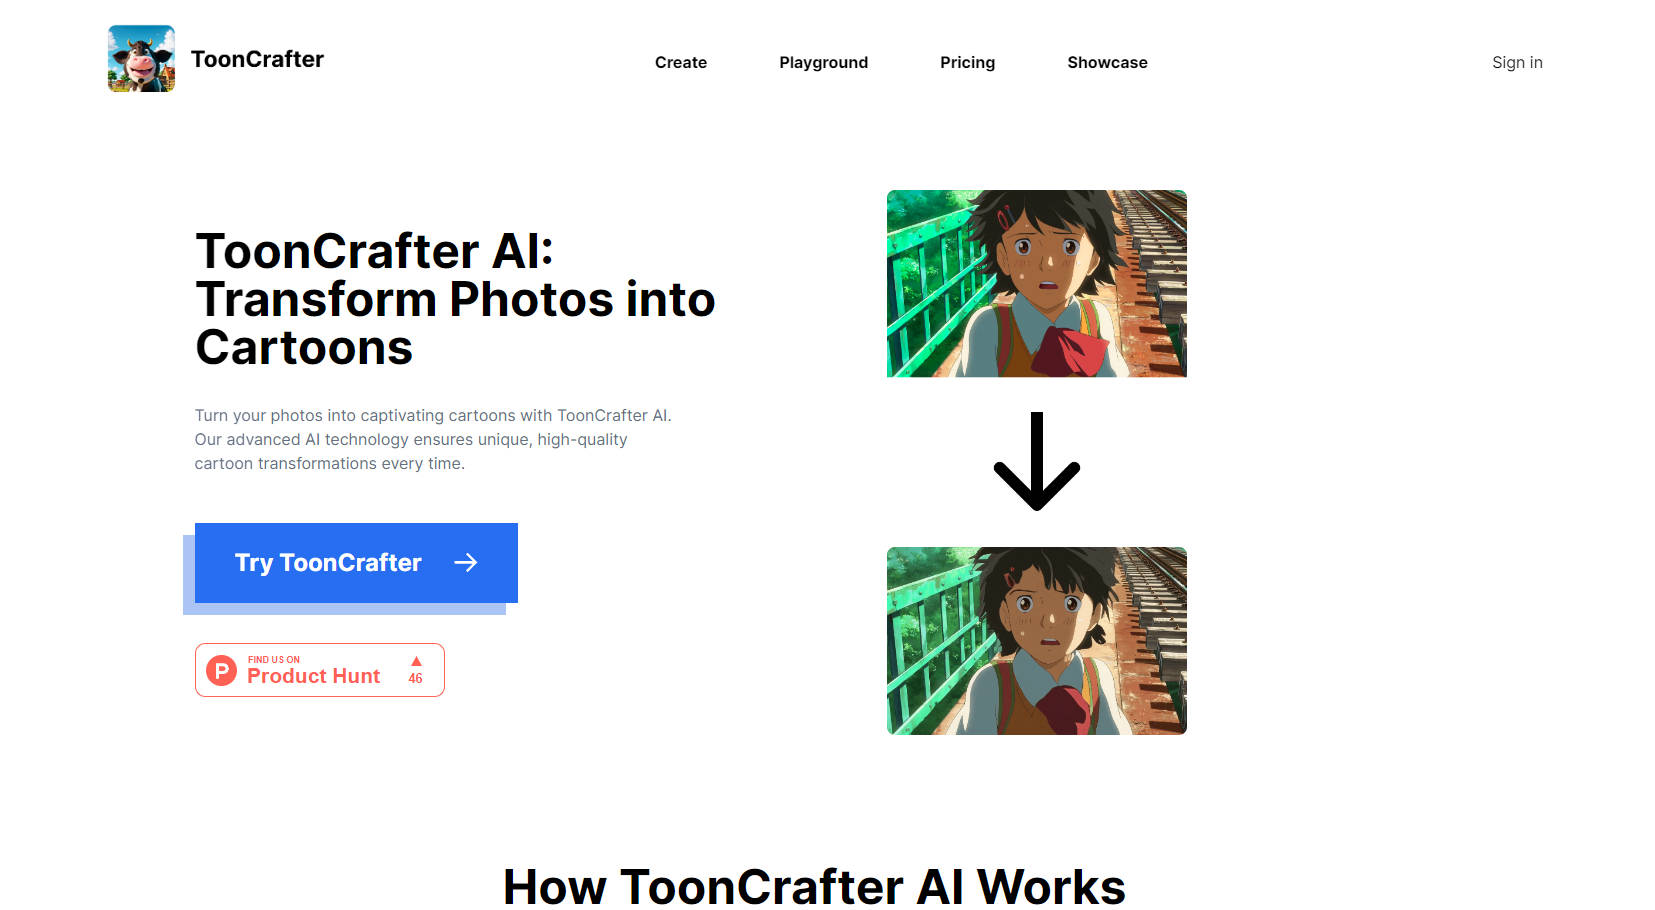 
ToonCrafter AI
